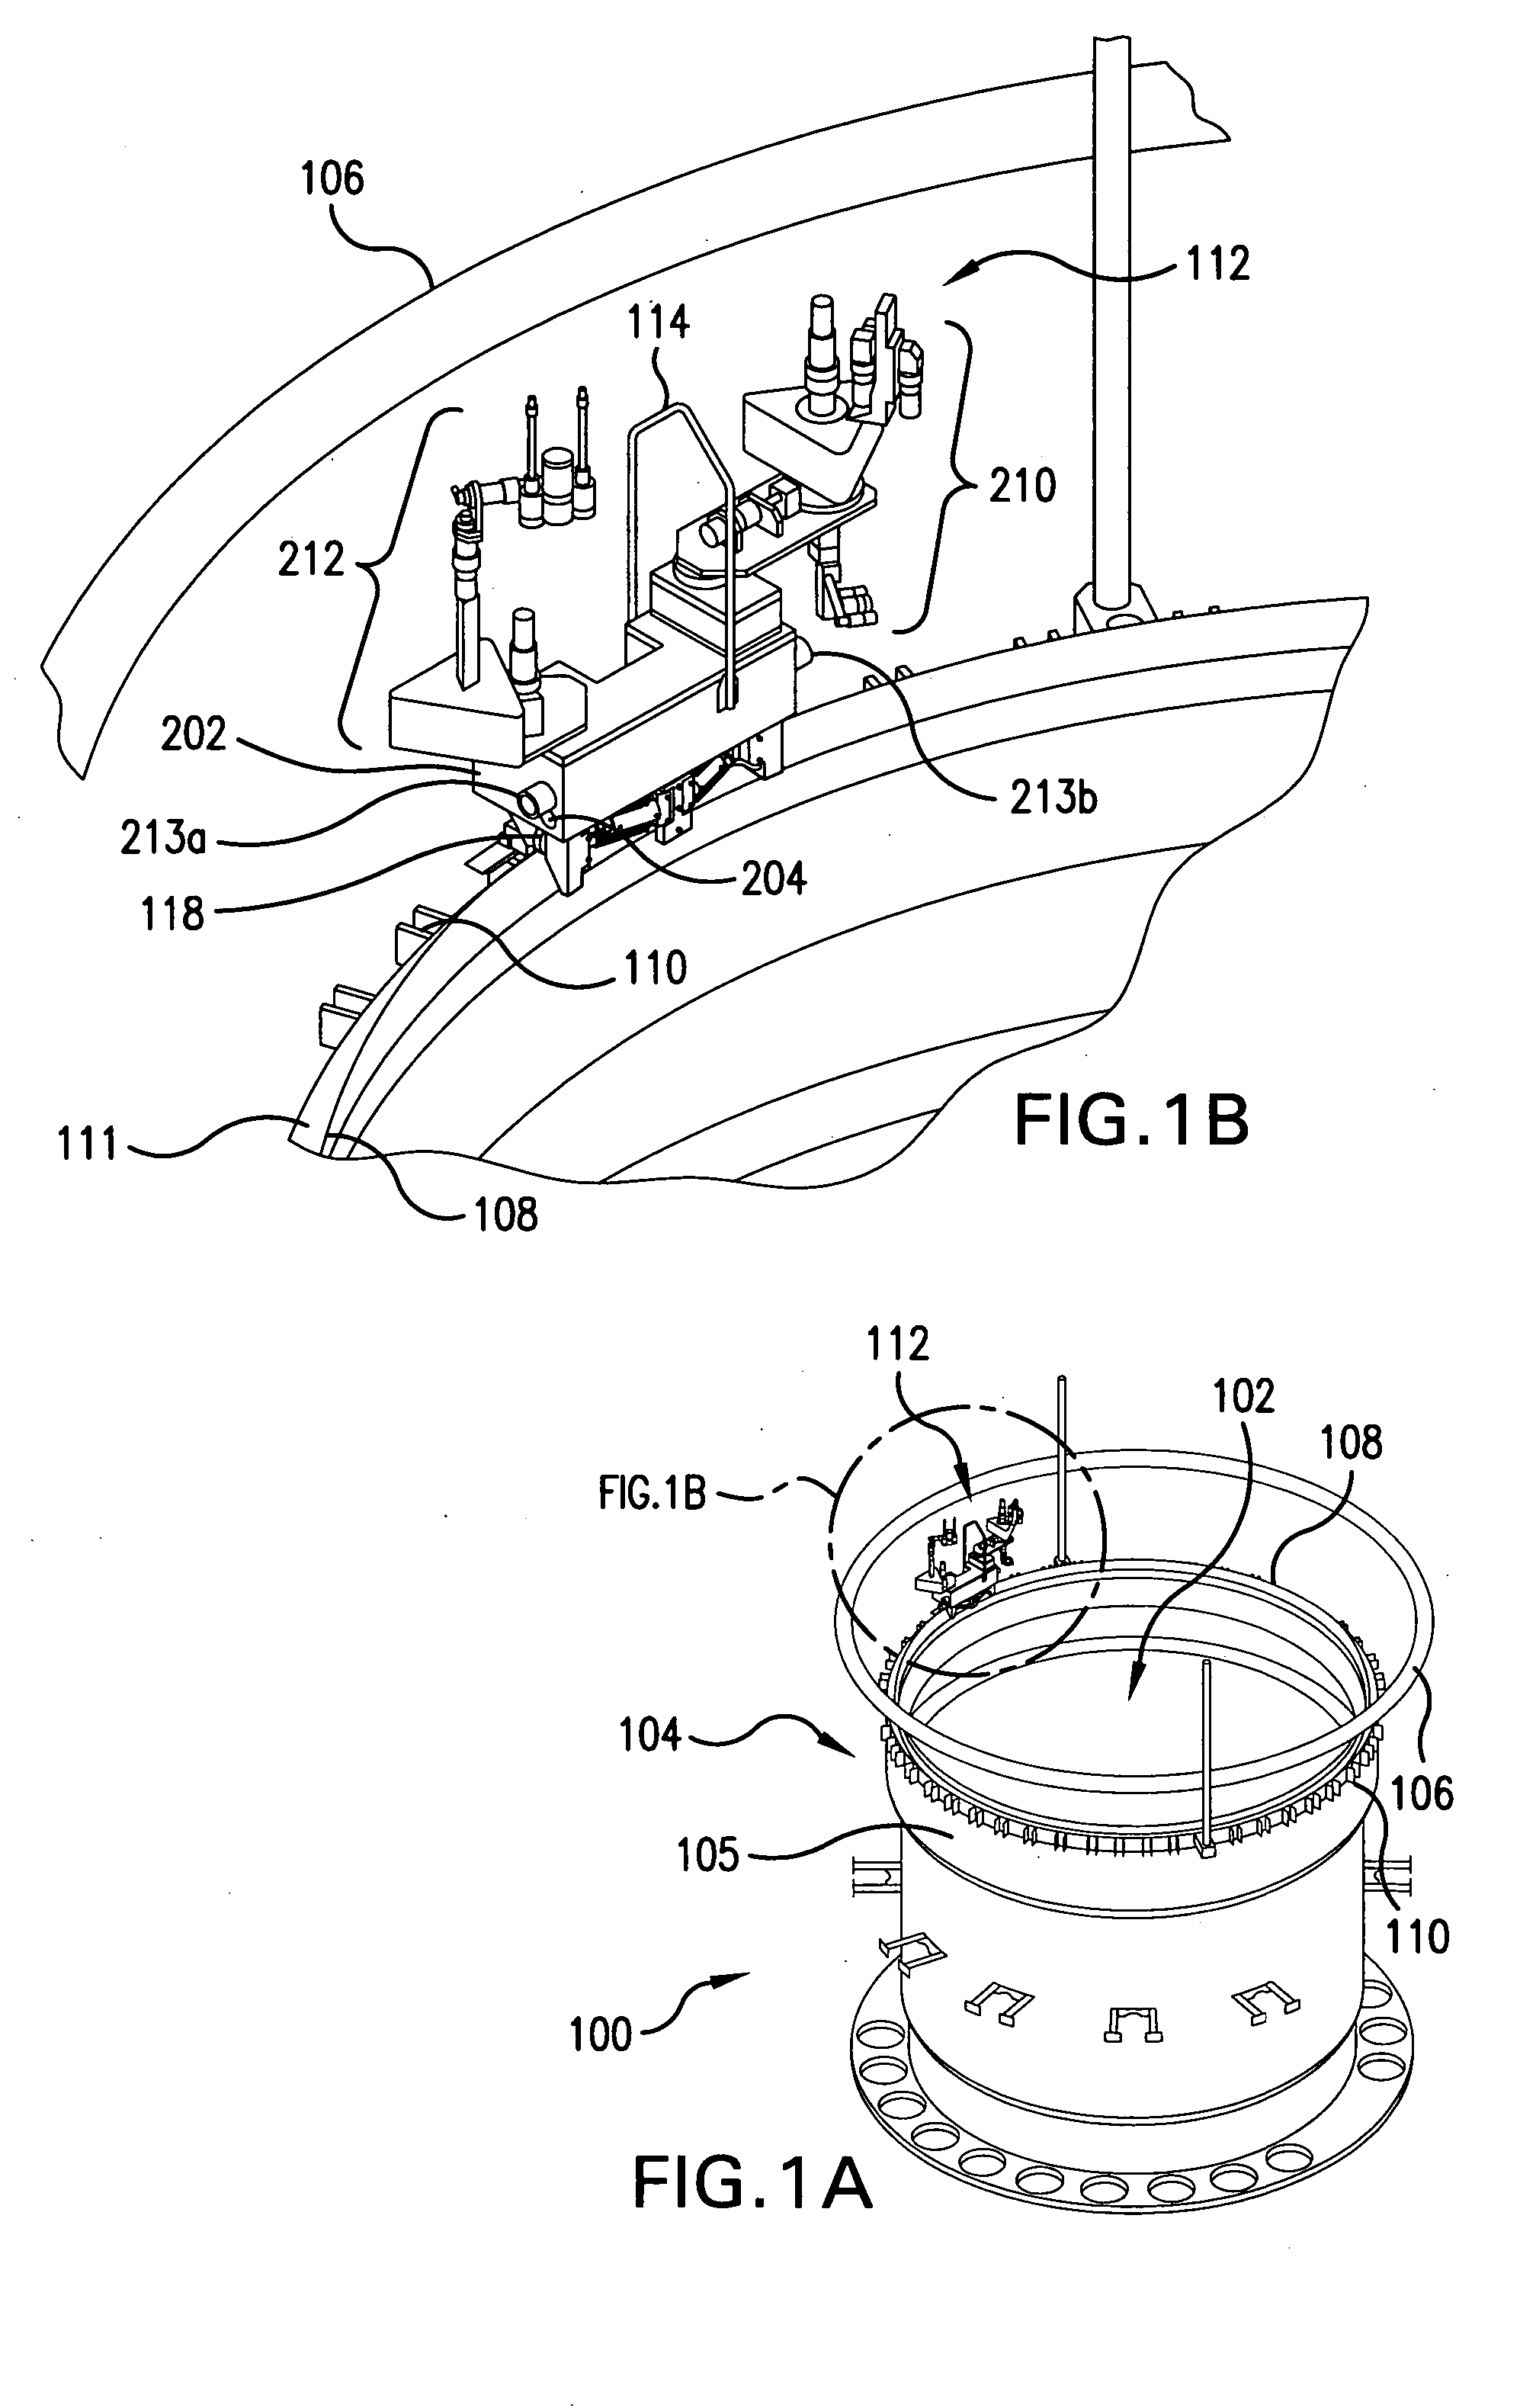 Apparatus and method for inspecting areas surrounding nuclear boiling water reactor core and annulus regions